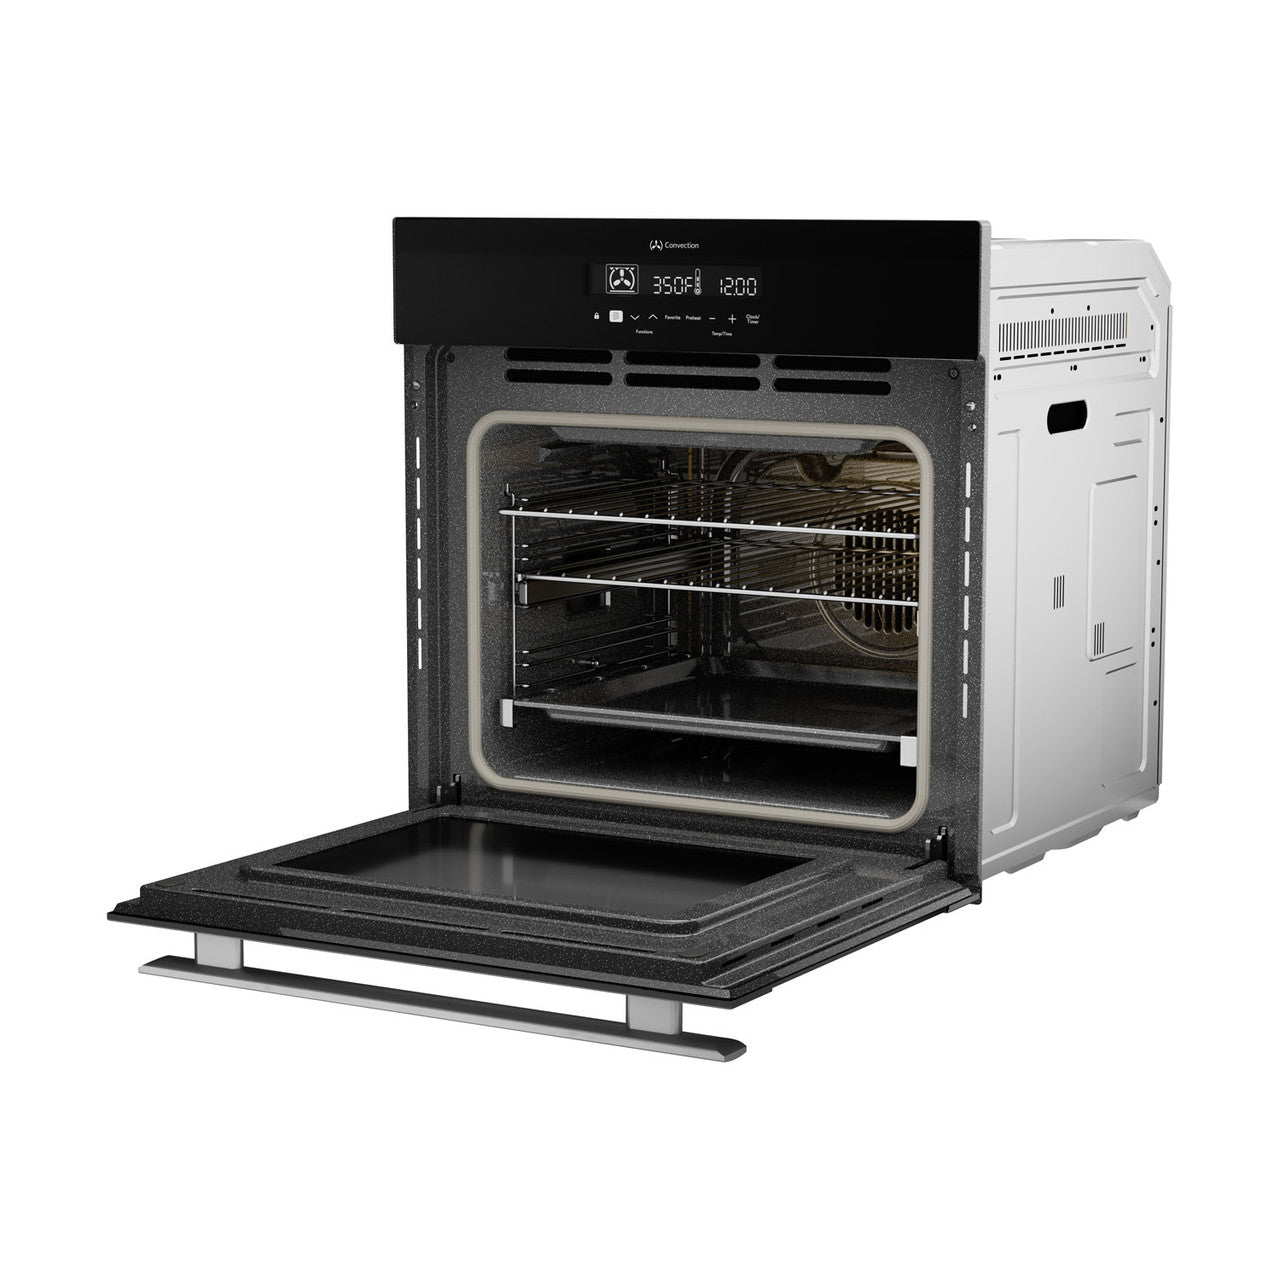 Sharp - 32.2 cu. ft Single Wall Oven in Stainless - SWA2450GS